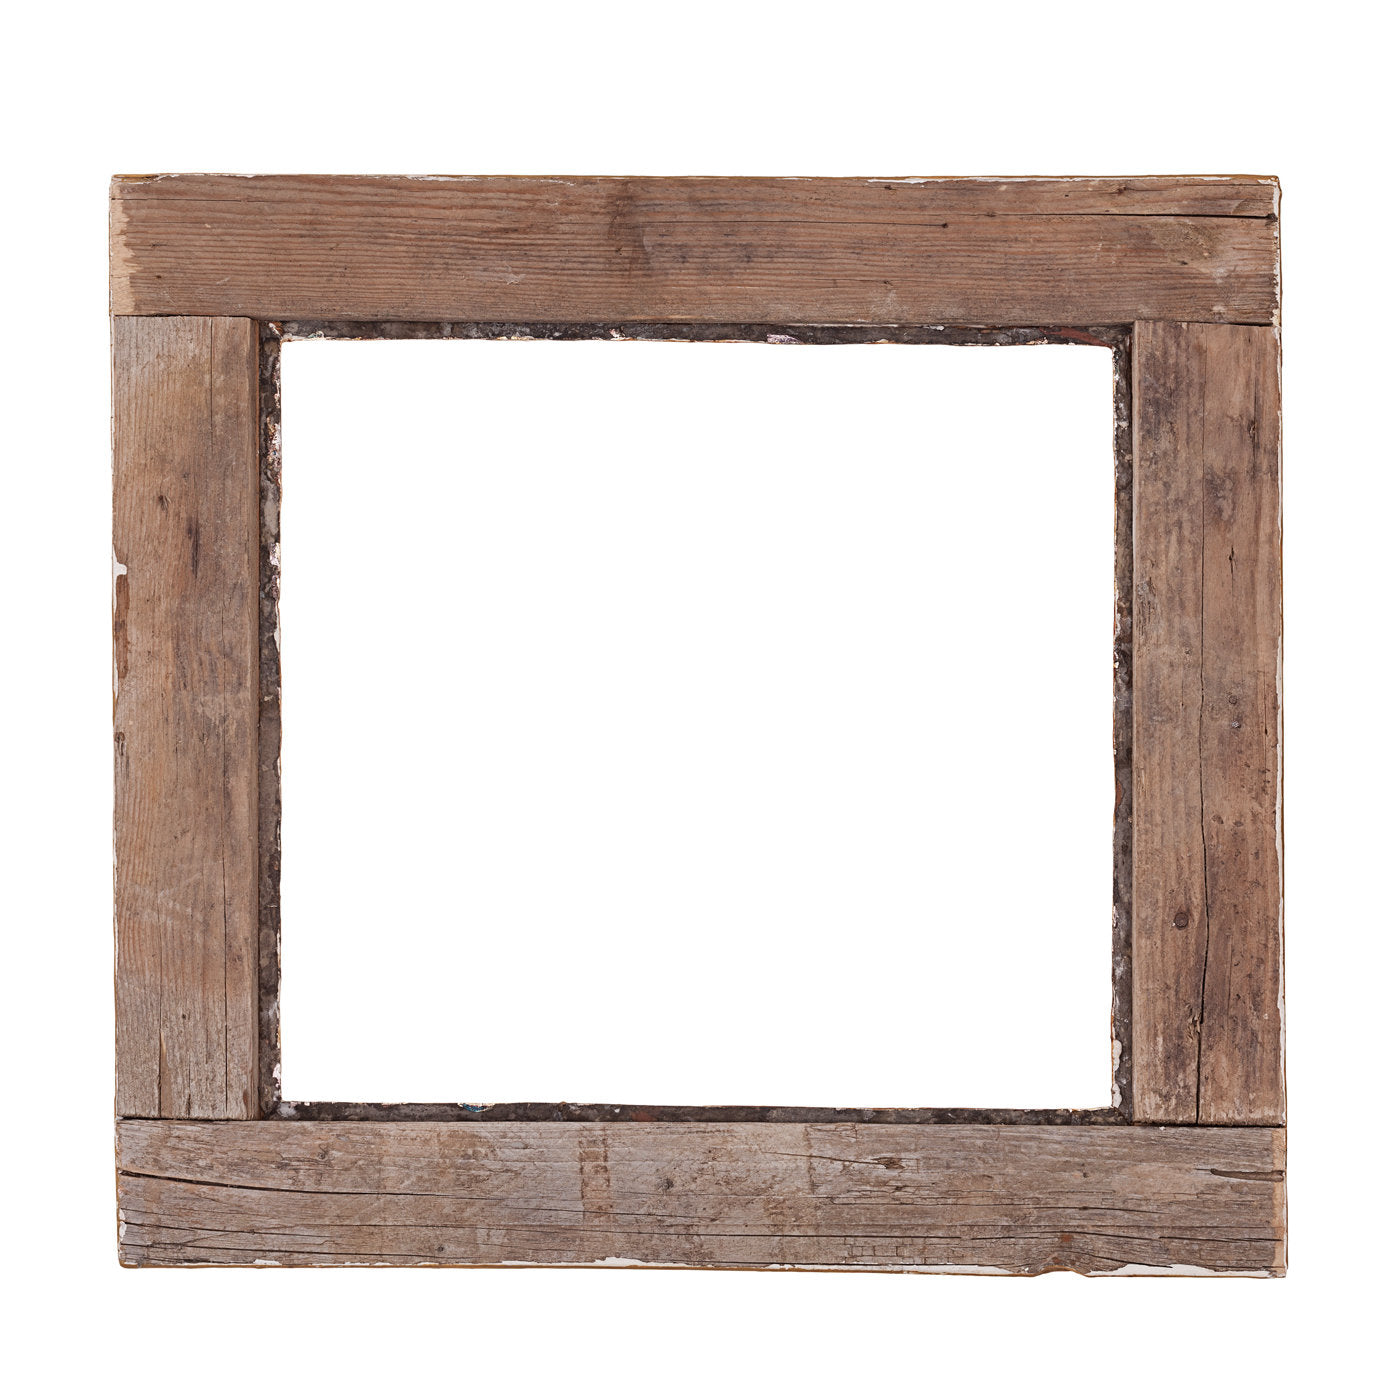 Bolognese Carved Wood Wall Mirror - Alternative view 4